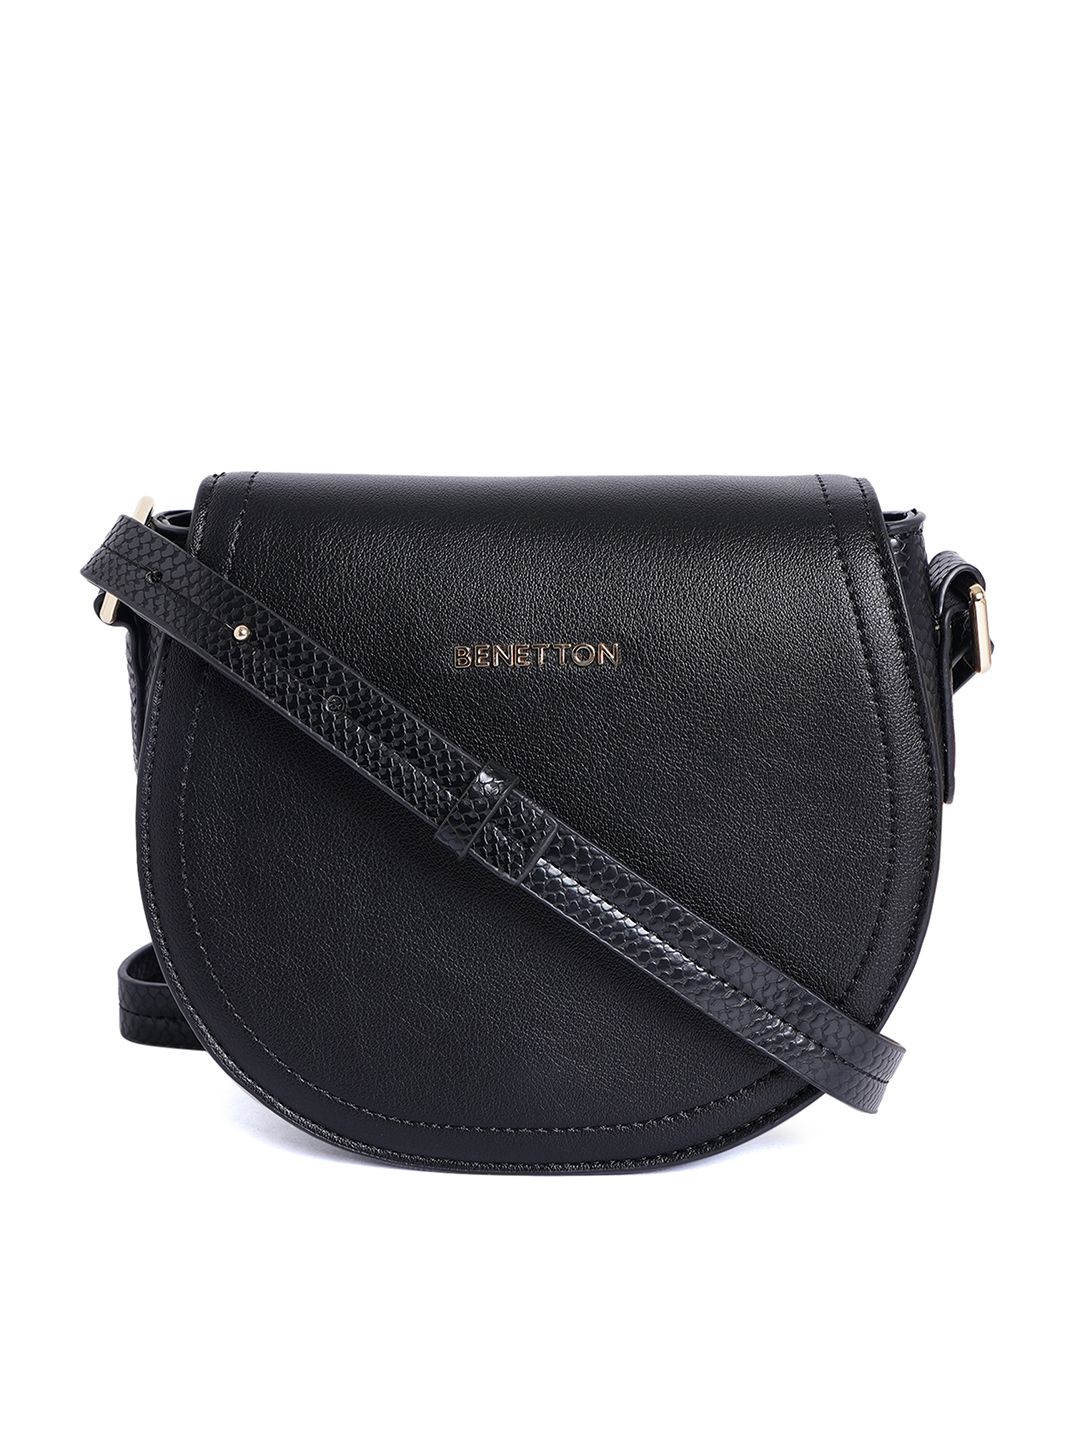 United Colors of Benetton Black Half Moon Sling Bag Price in India